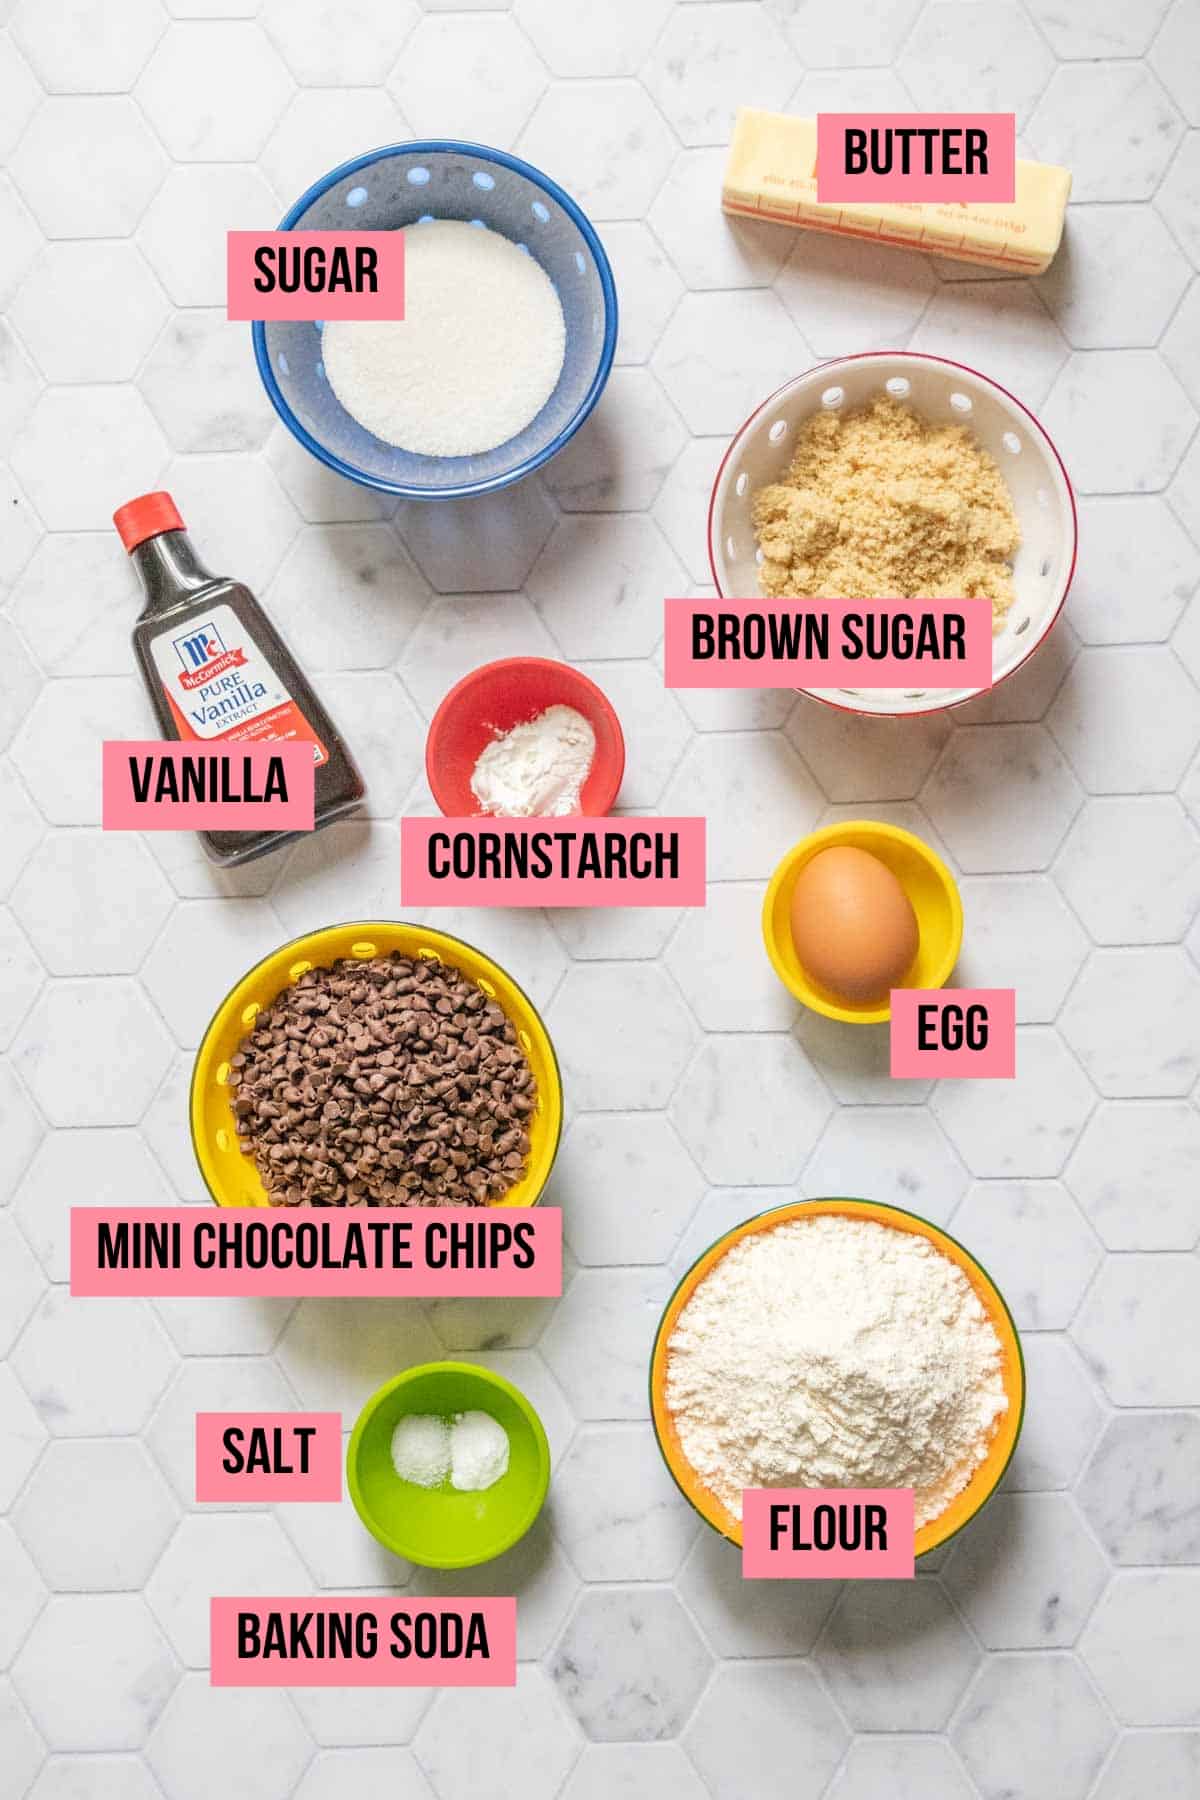 Ingredients for mini chocolate chip cookies on a tile surface with labels.